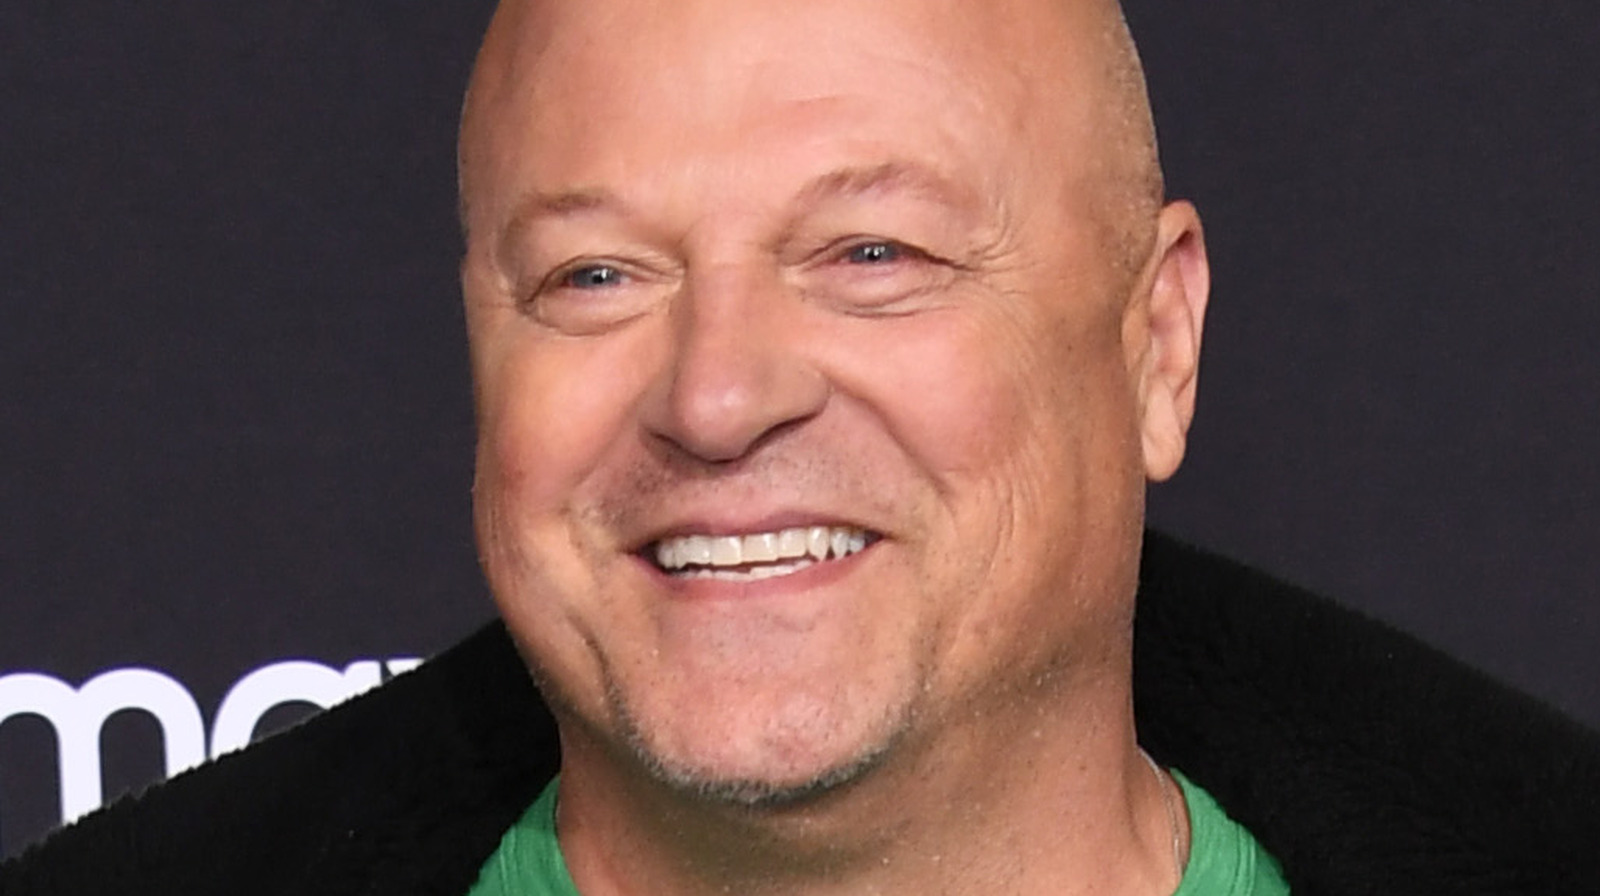 Michael Chiklis, who plays the late Boston Celtics owner Red